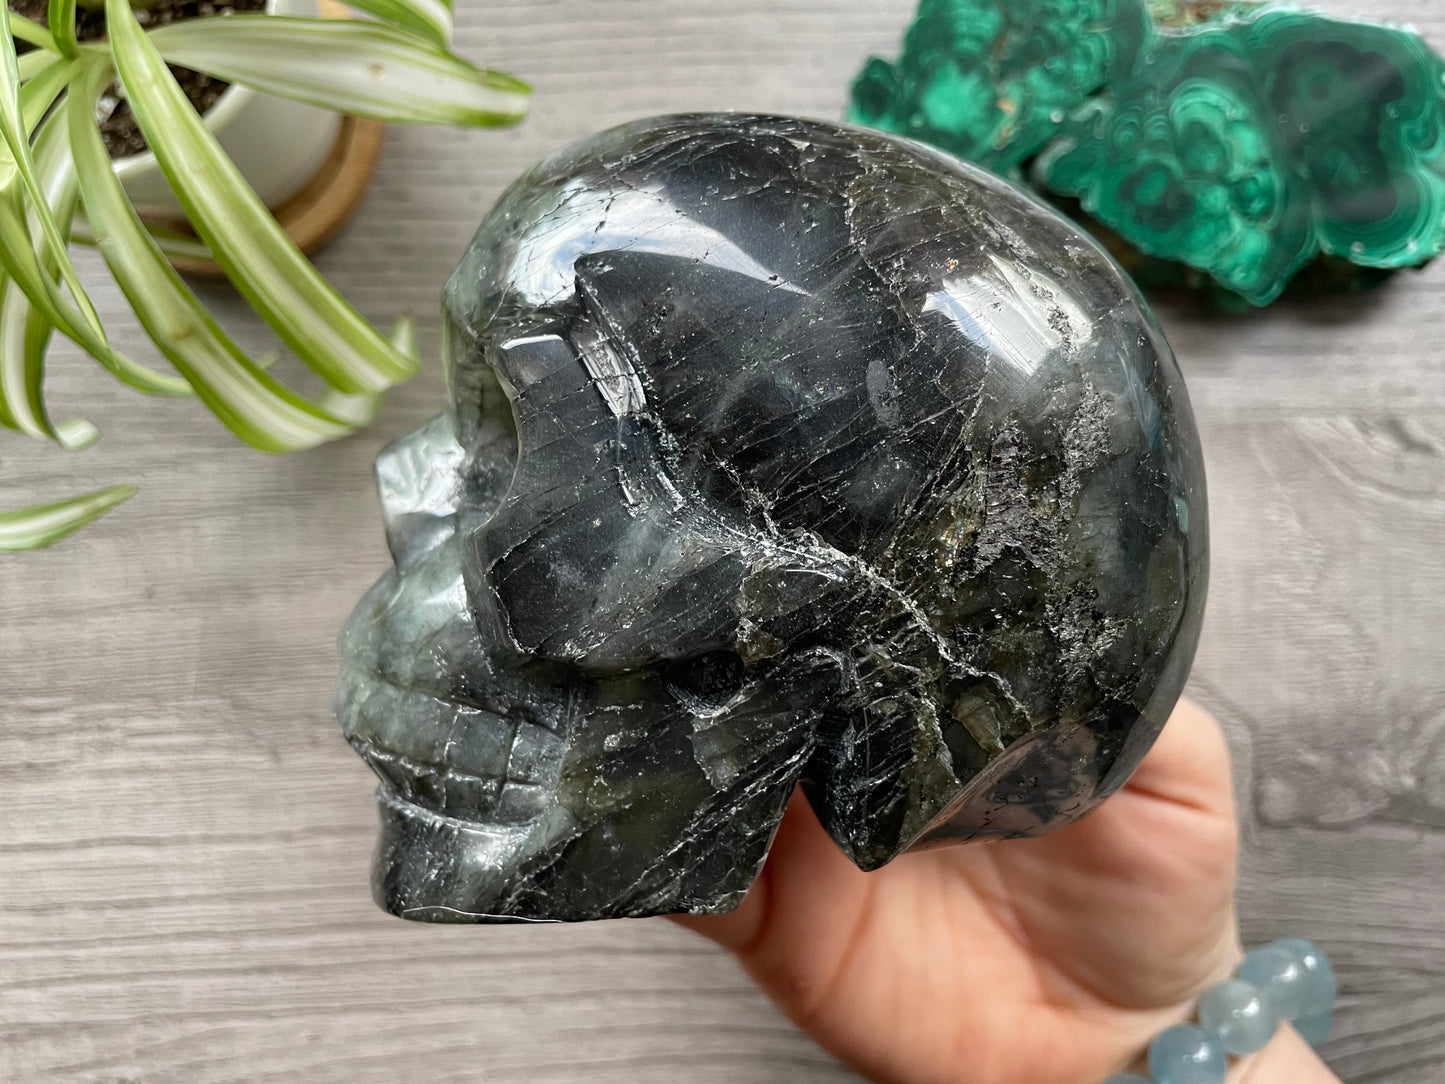 Labradorite Crystal Skull 1.15kg - The Wandering Fox Emporium, Your Metaphysical Store side 2